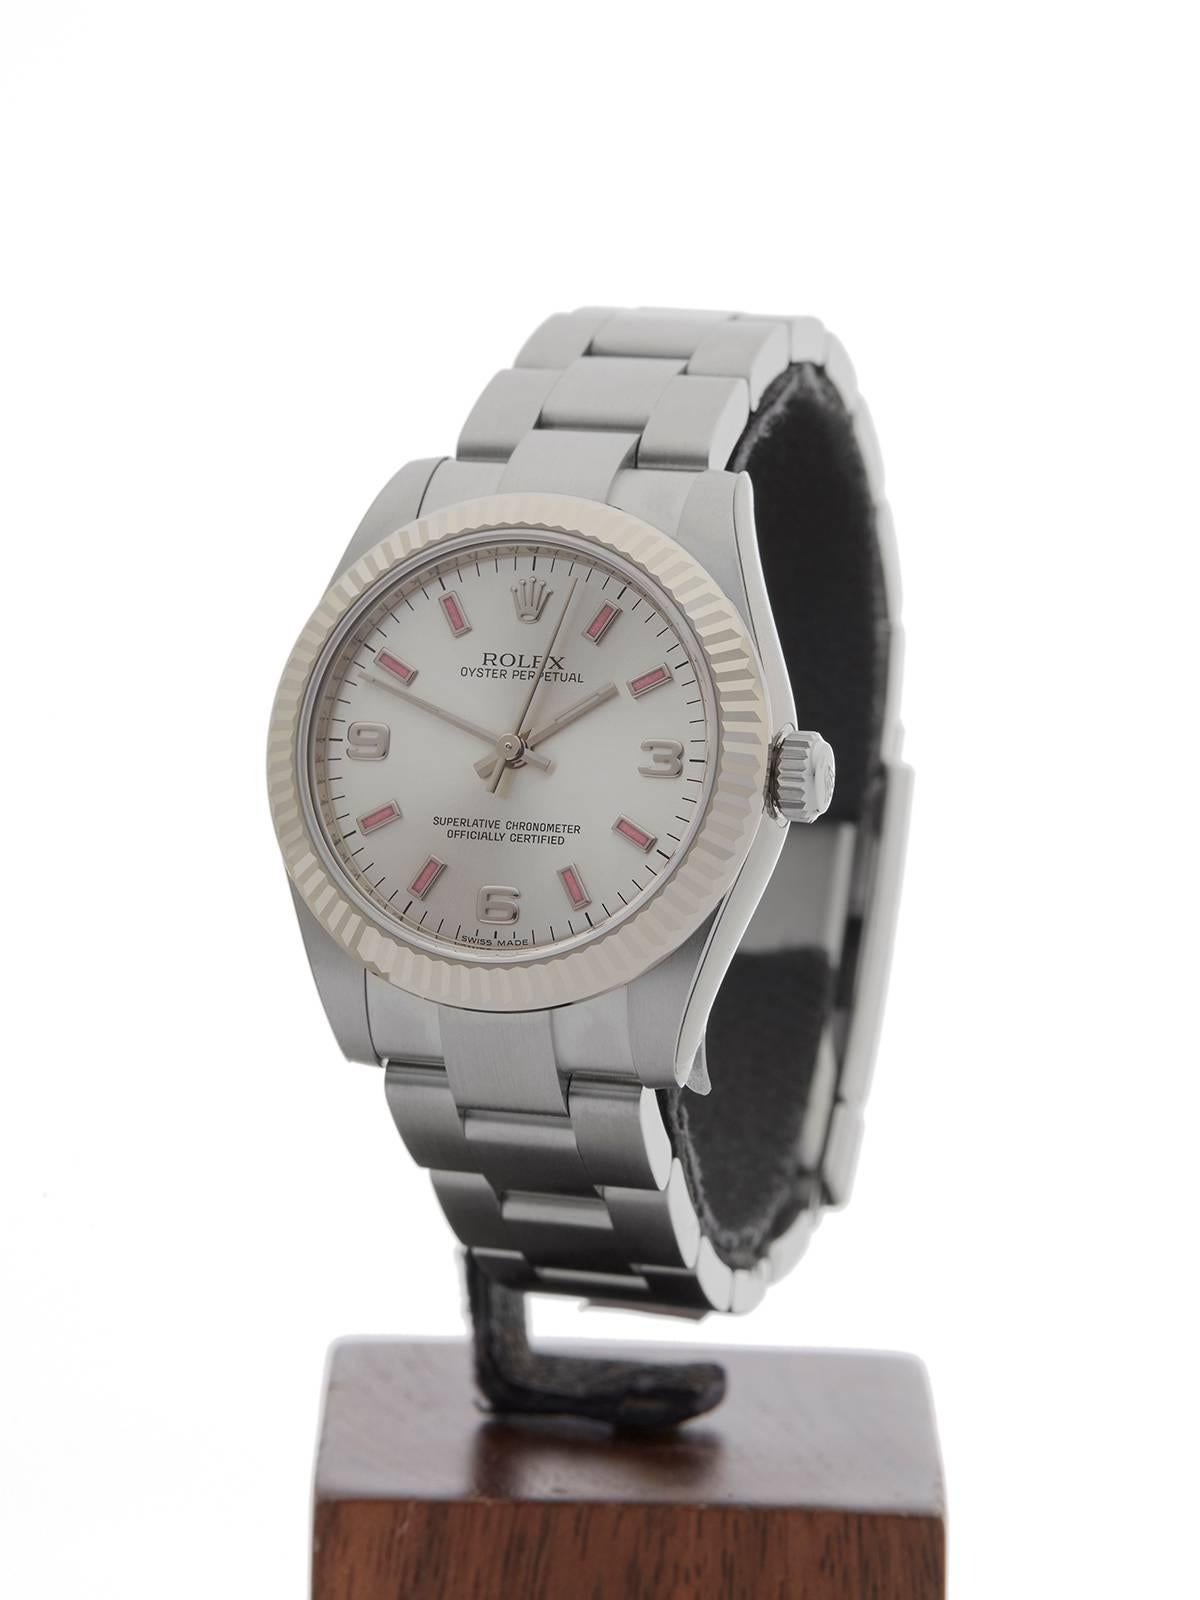 REF	W3686
MODEL NUMBER	177234
SERIAL NUMBER	247*****
CONDITION	10 - Unworn condition
GENDER	Ladies
AGE	9th February 2017
CASE DIAMETER	32 mm
CASE SIZE	32mm
BOX & PAPERS	Box, Manuals & Guarantee
MOVEMENT	Automatic
CASE	Stainless steel/18k white